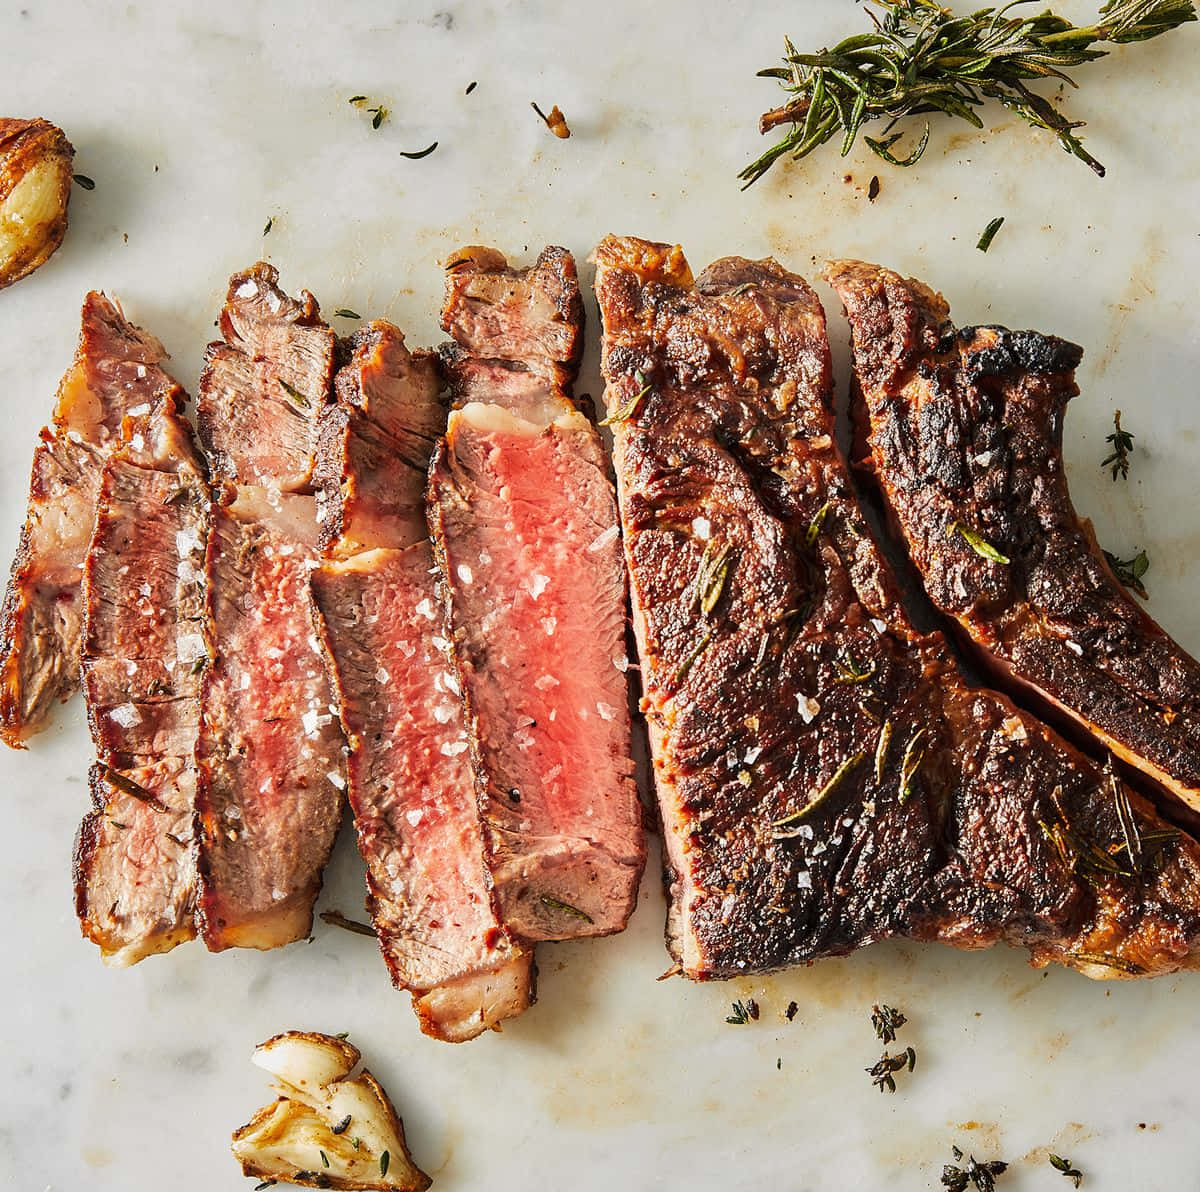 A Steak With Rosemary And Garlic On A Marble Countertop